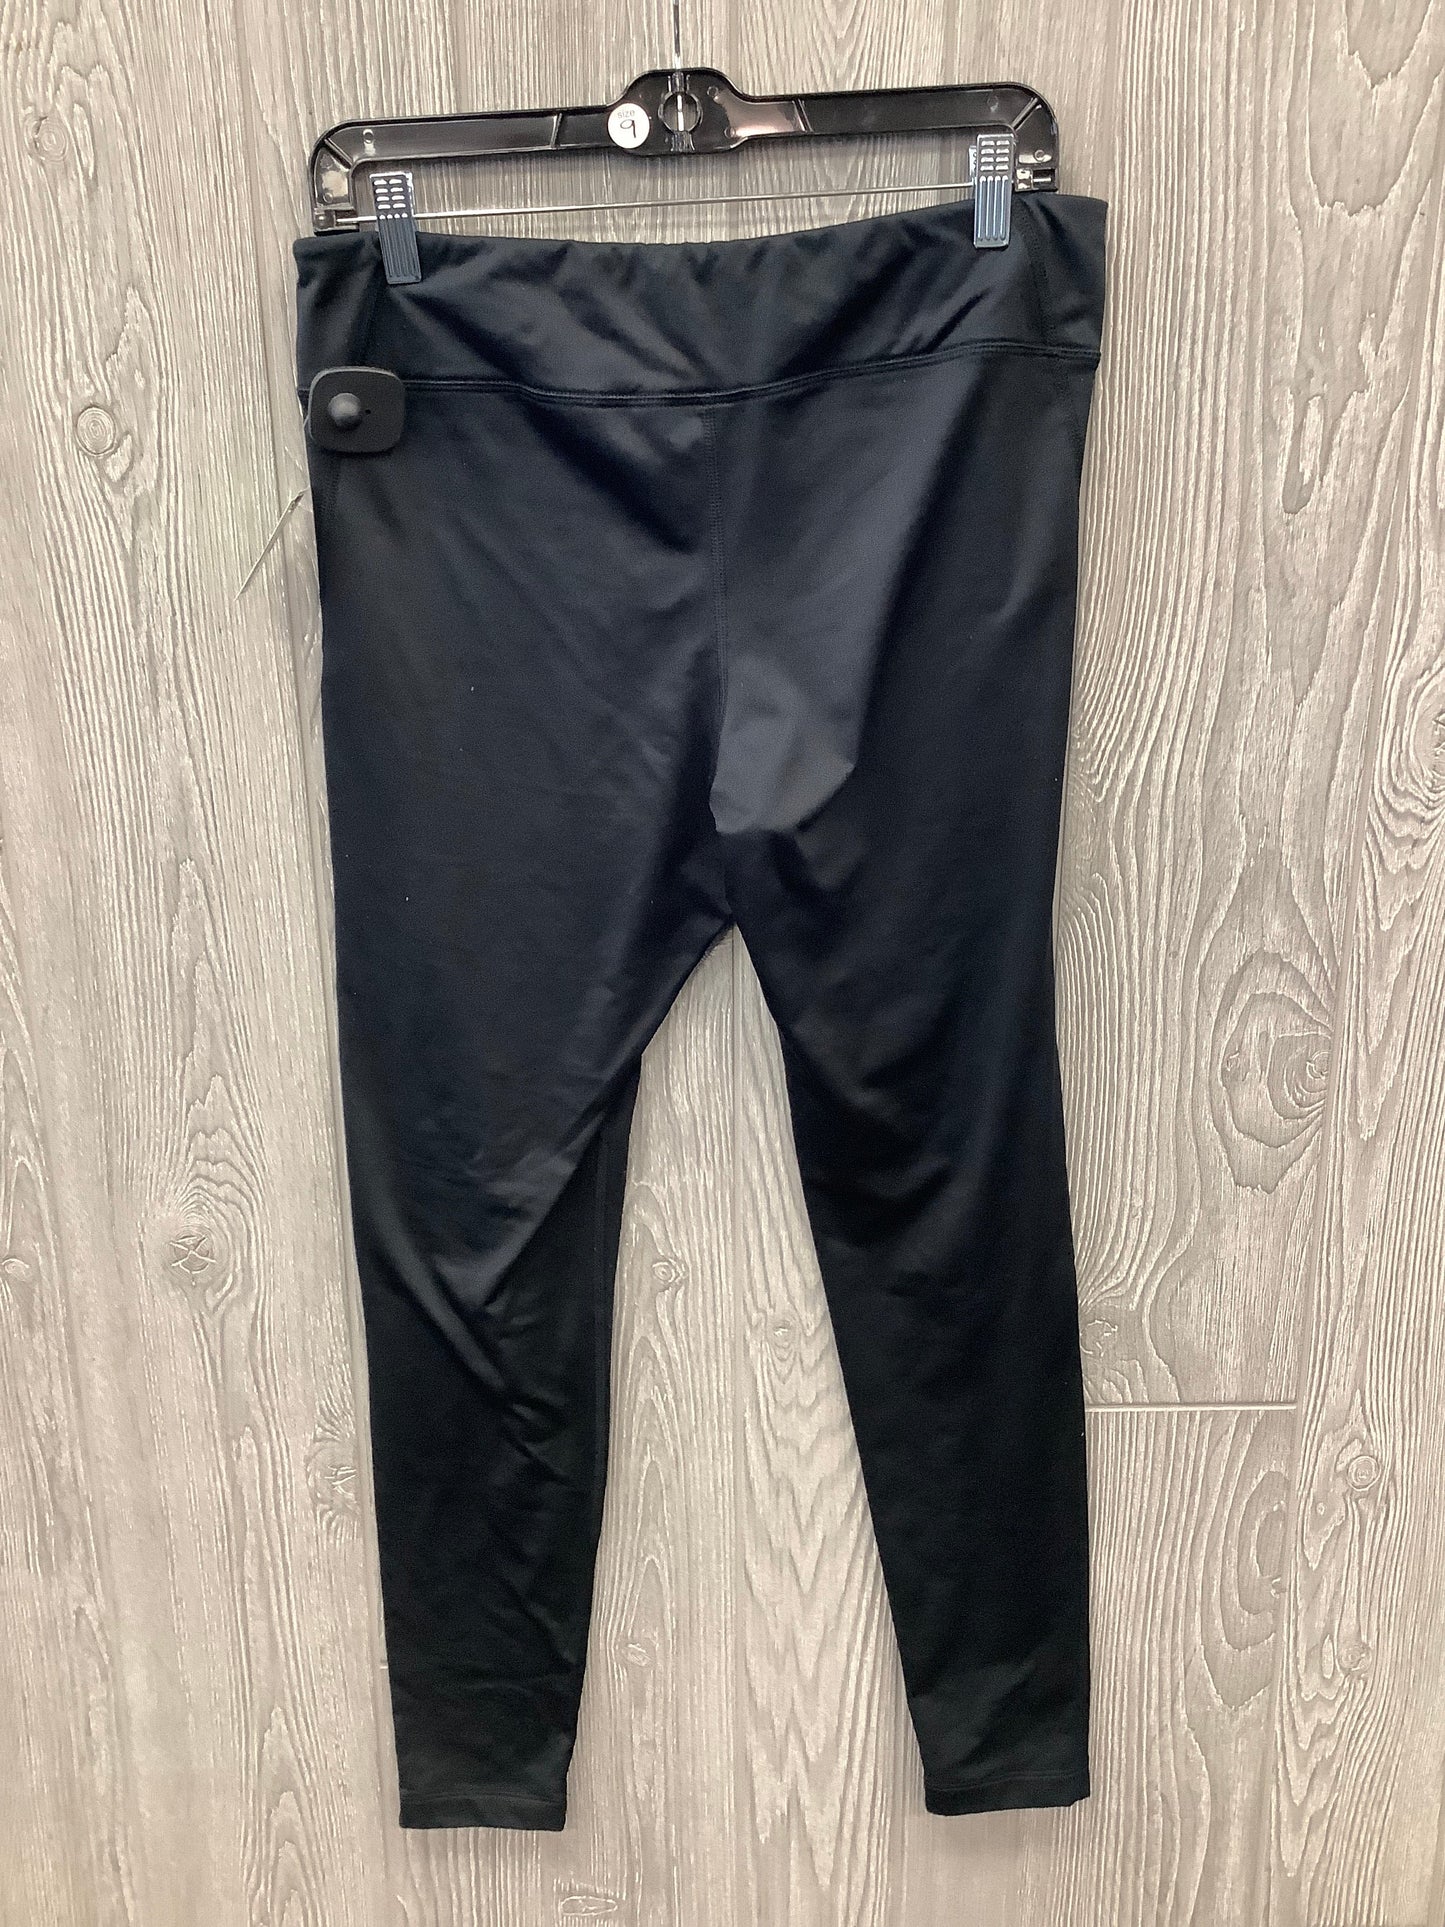 Athletic Leggings By Under Armour  Size: Xl